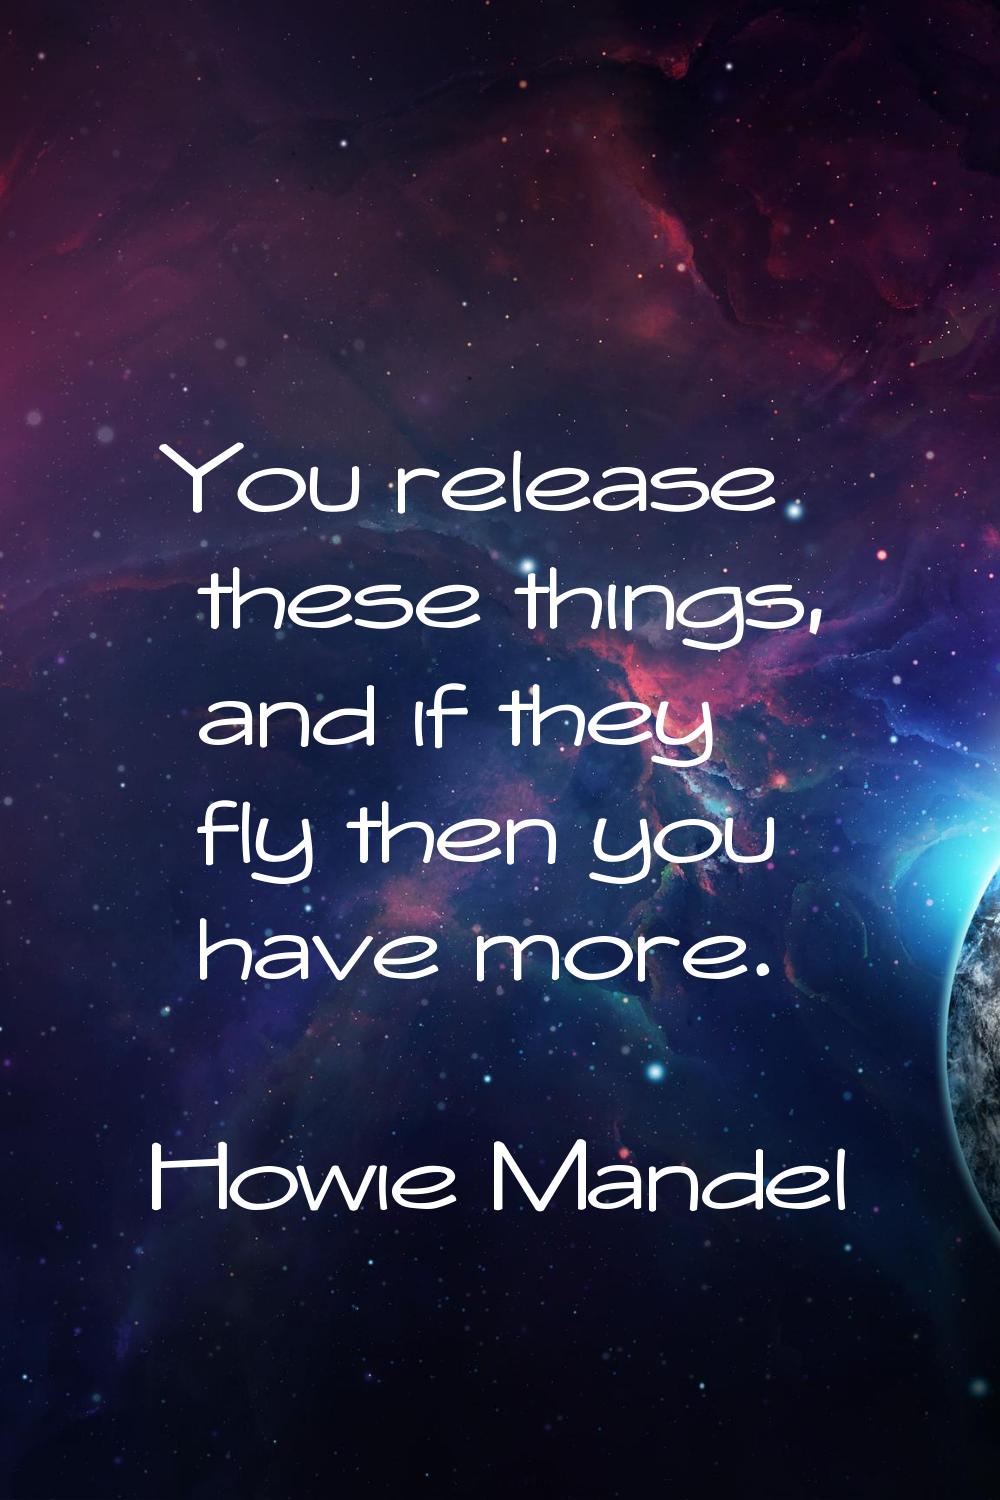 You release these things, and if they fly then you have more.